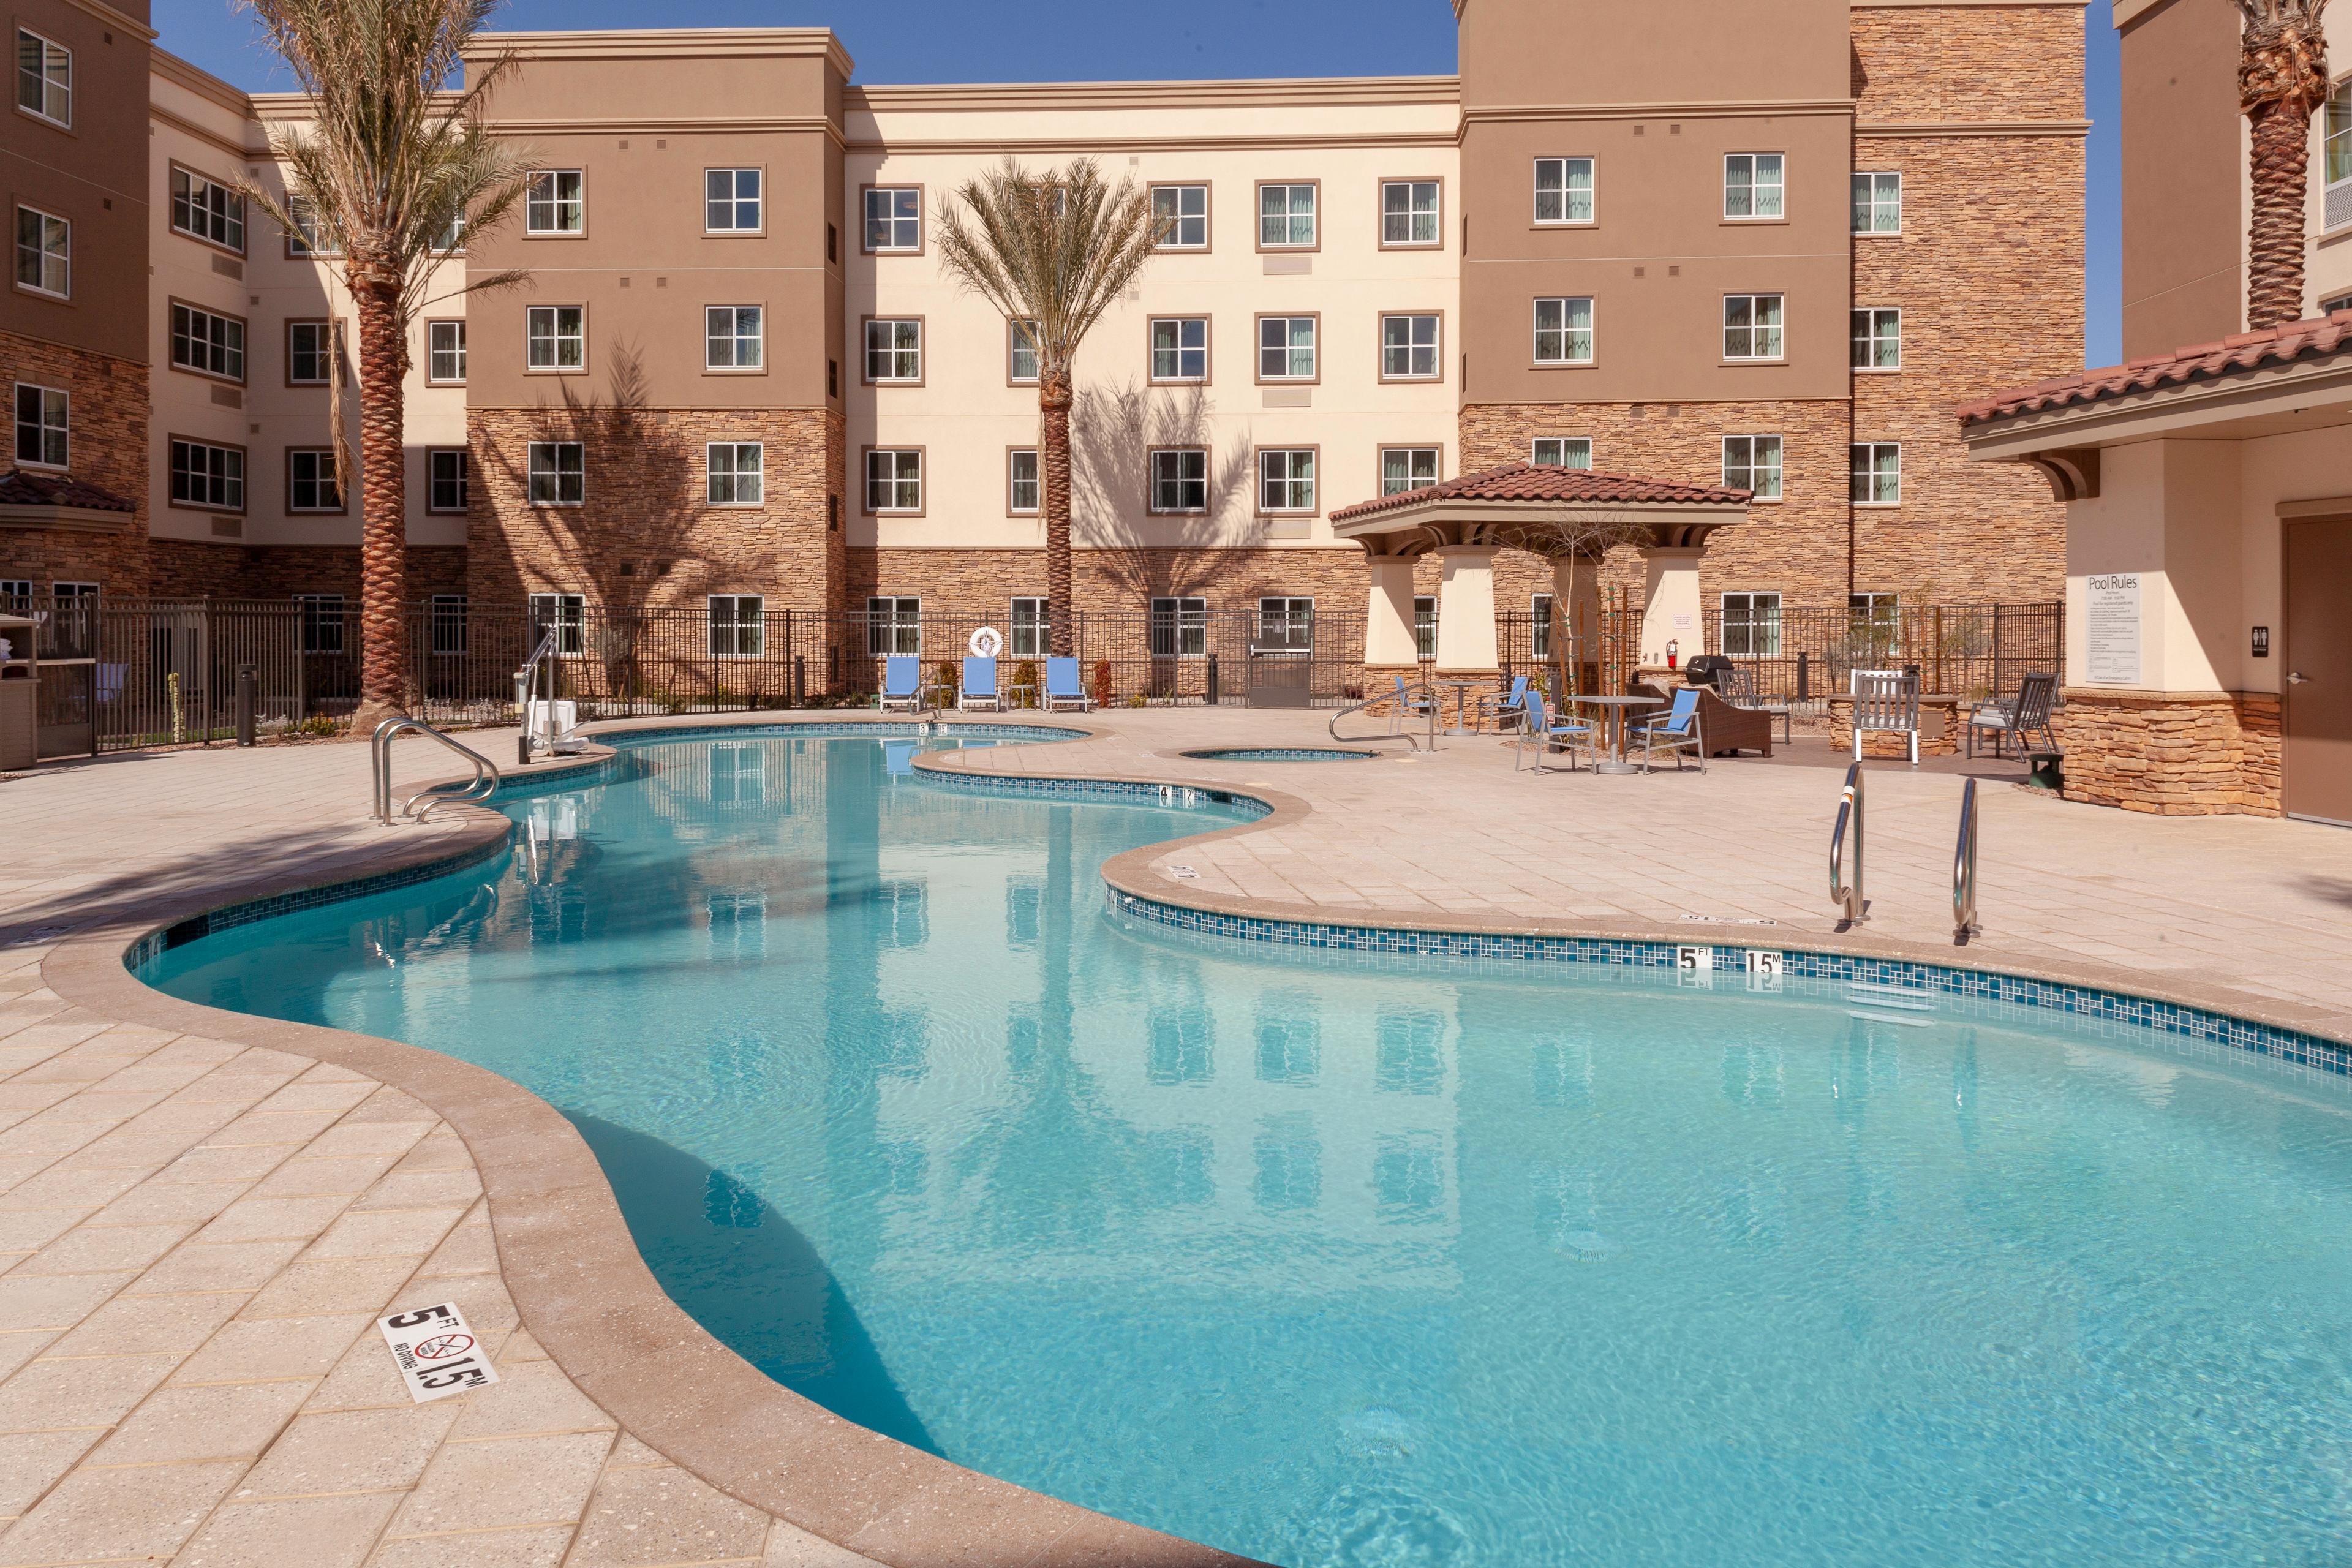 Relax in our beautiful outdoor pool.  Call the front desk for pool information.  